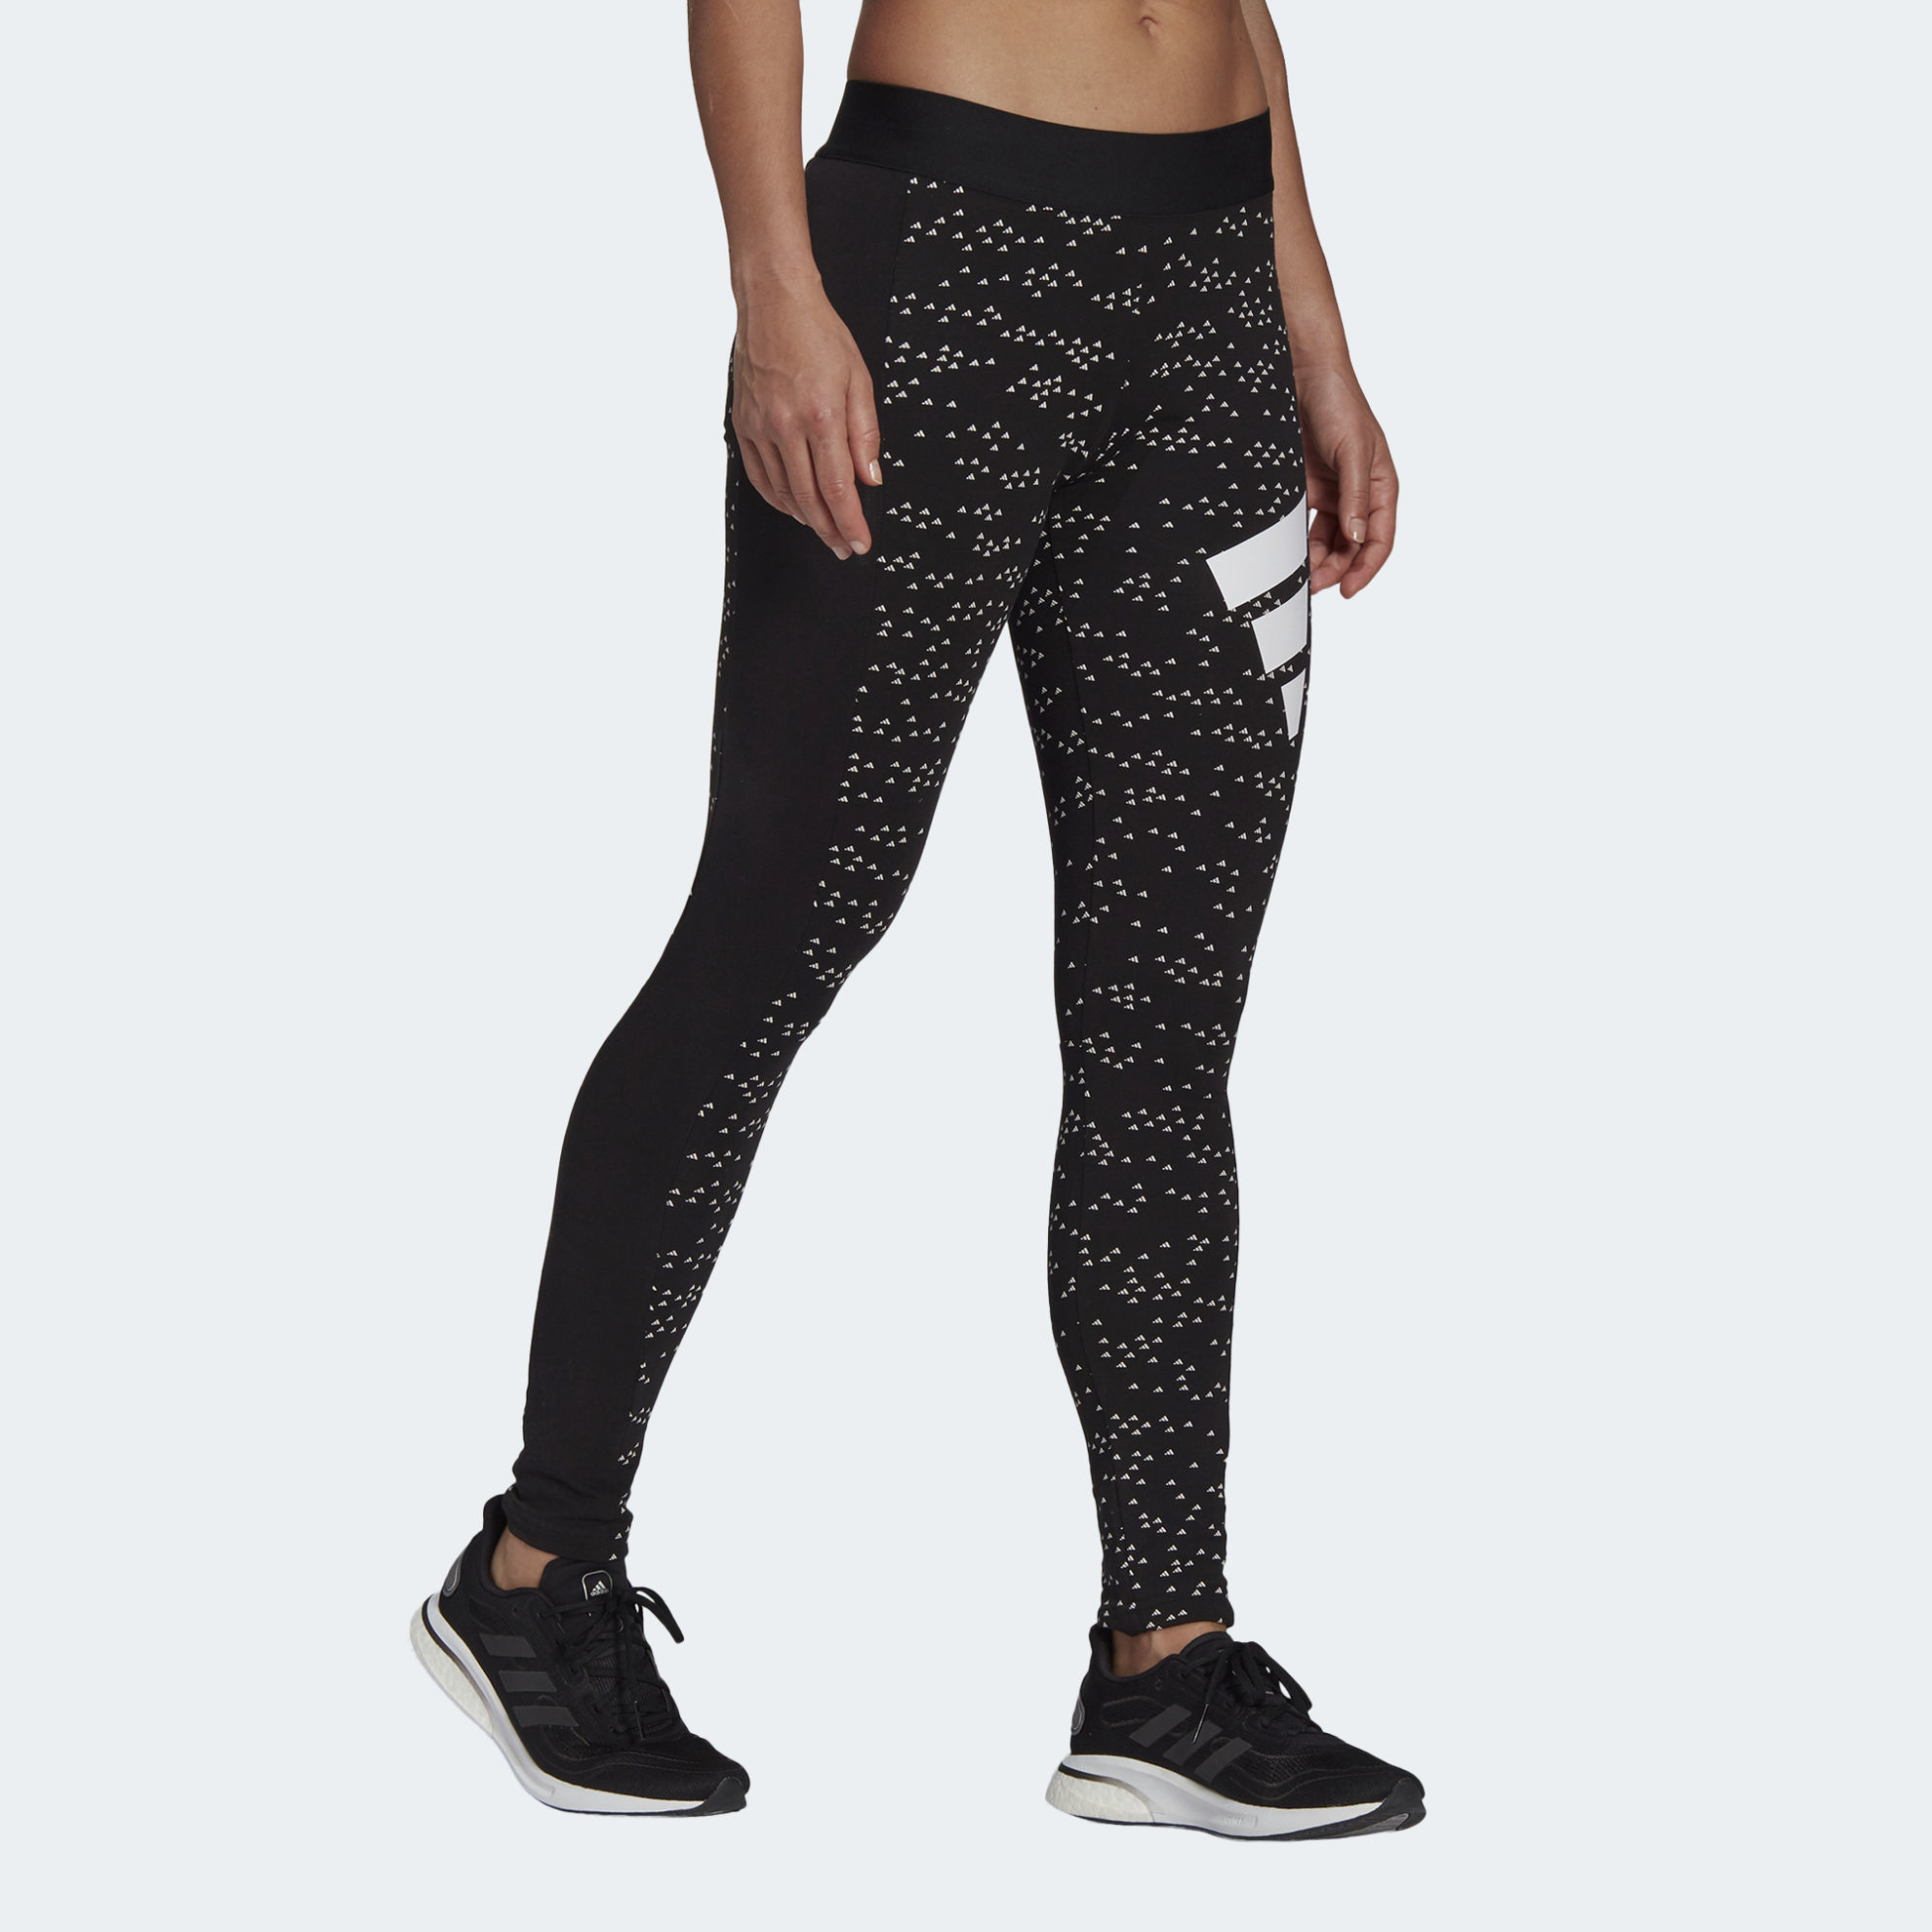 Precision Society Agriculture Adidas Leggings | 1099 International Size of